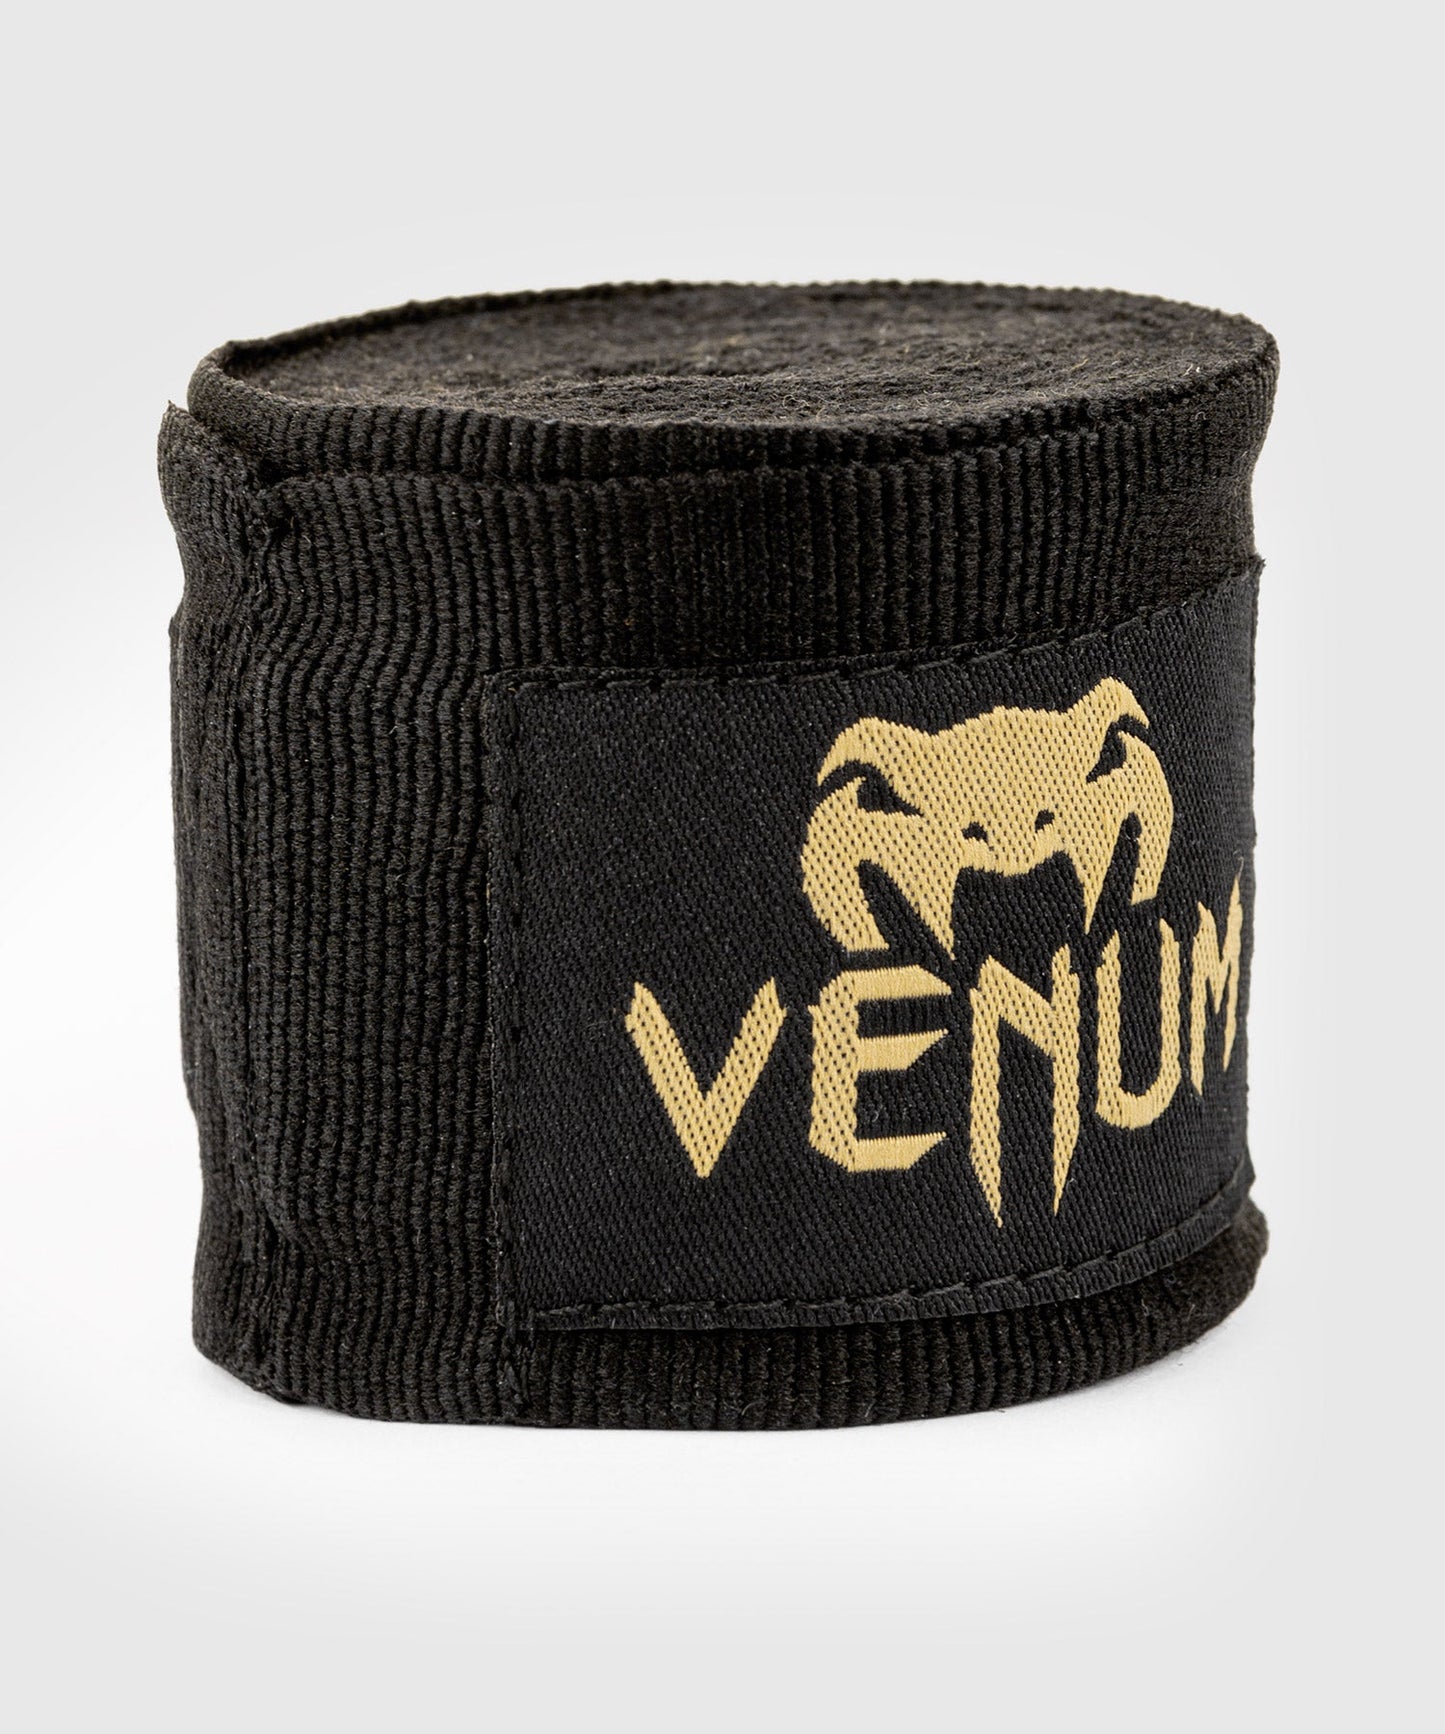 Venum Kontact Boxing Hand Wraps - Black/Gold - 98 in